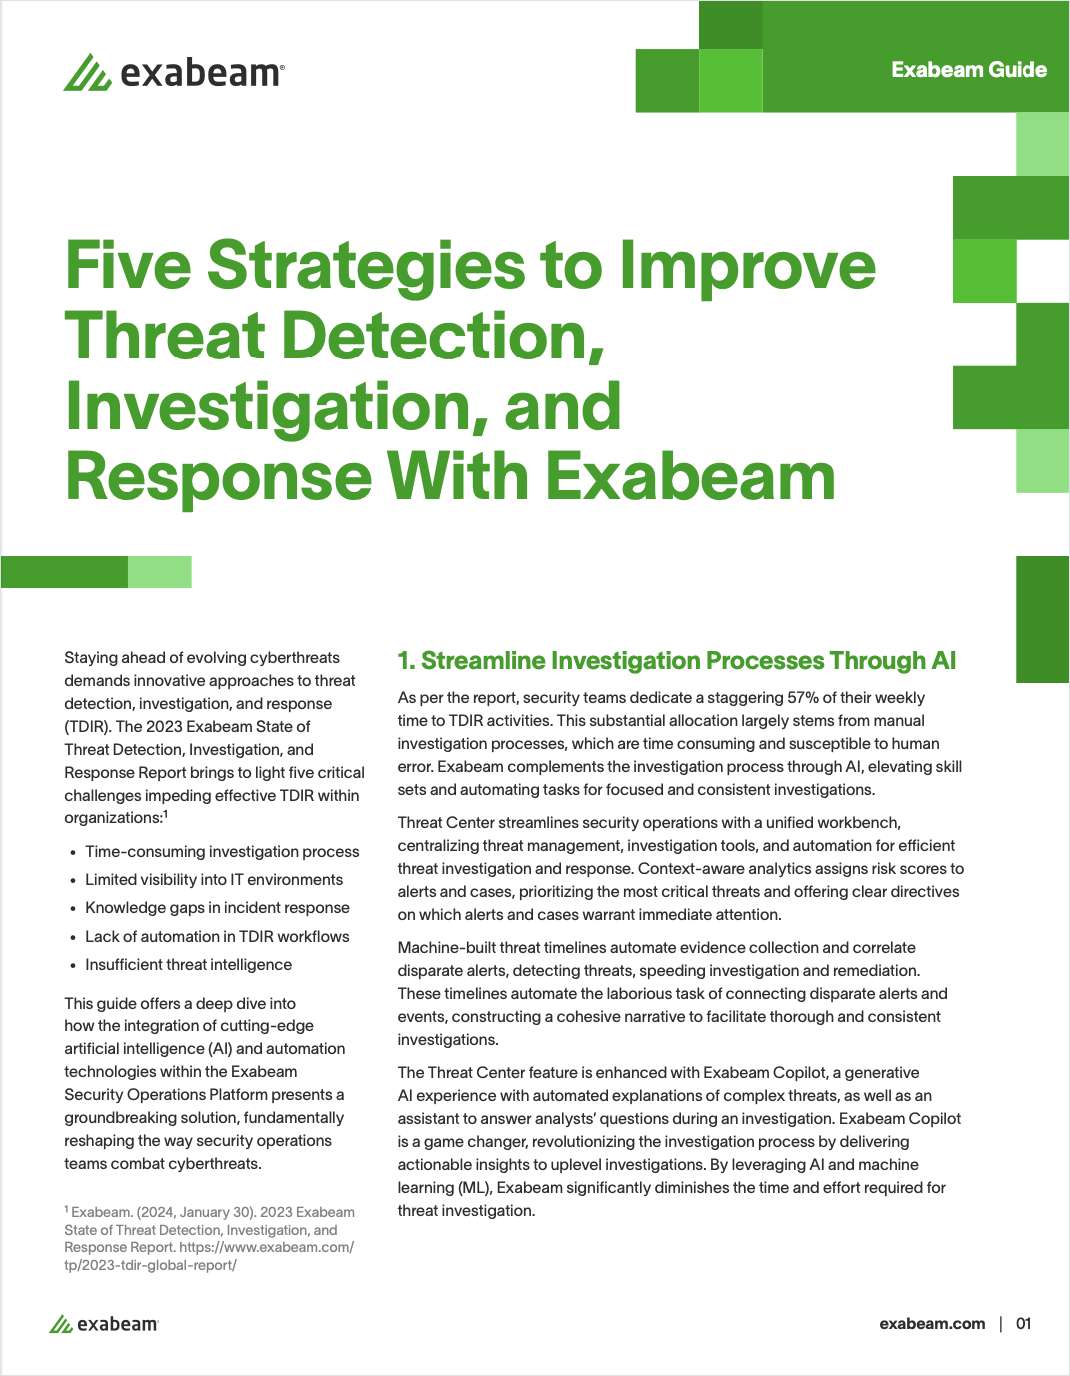 Five Strategies to Improve Threat Detection, Investigation, and Response With Exabeam